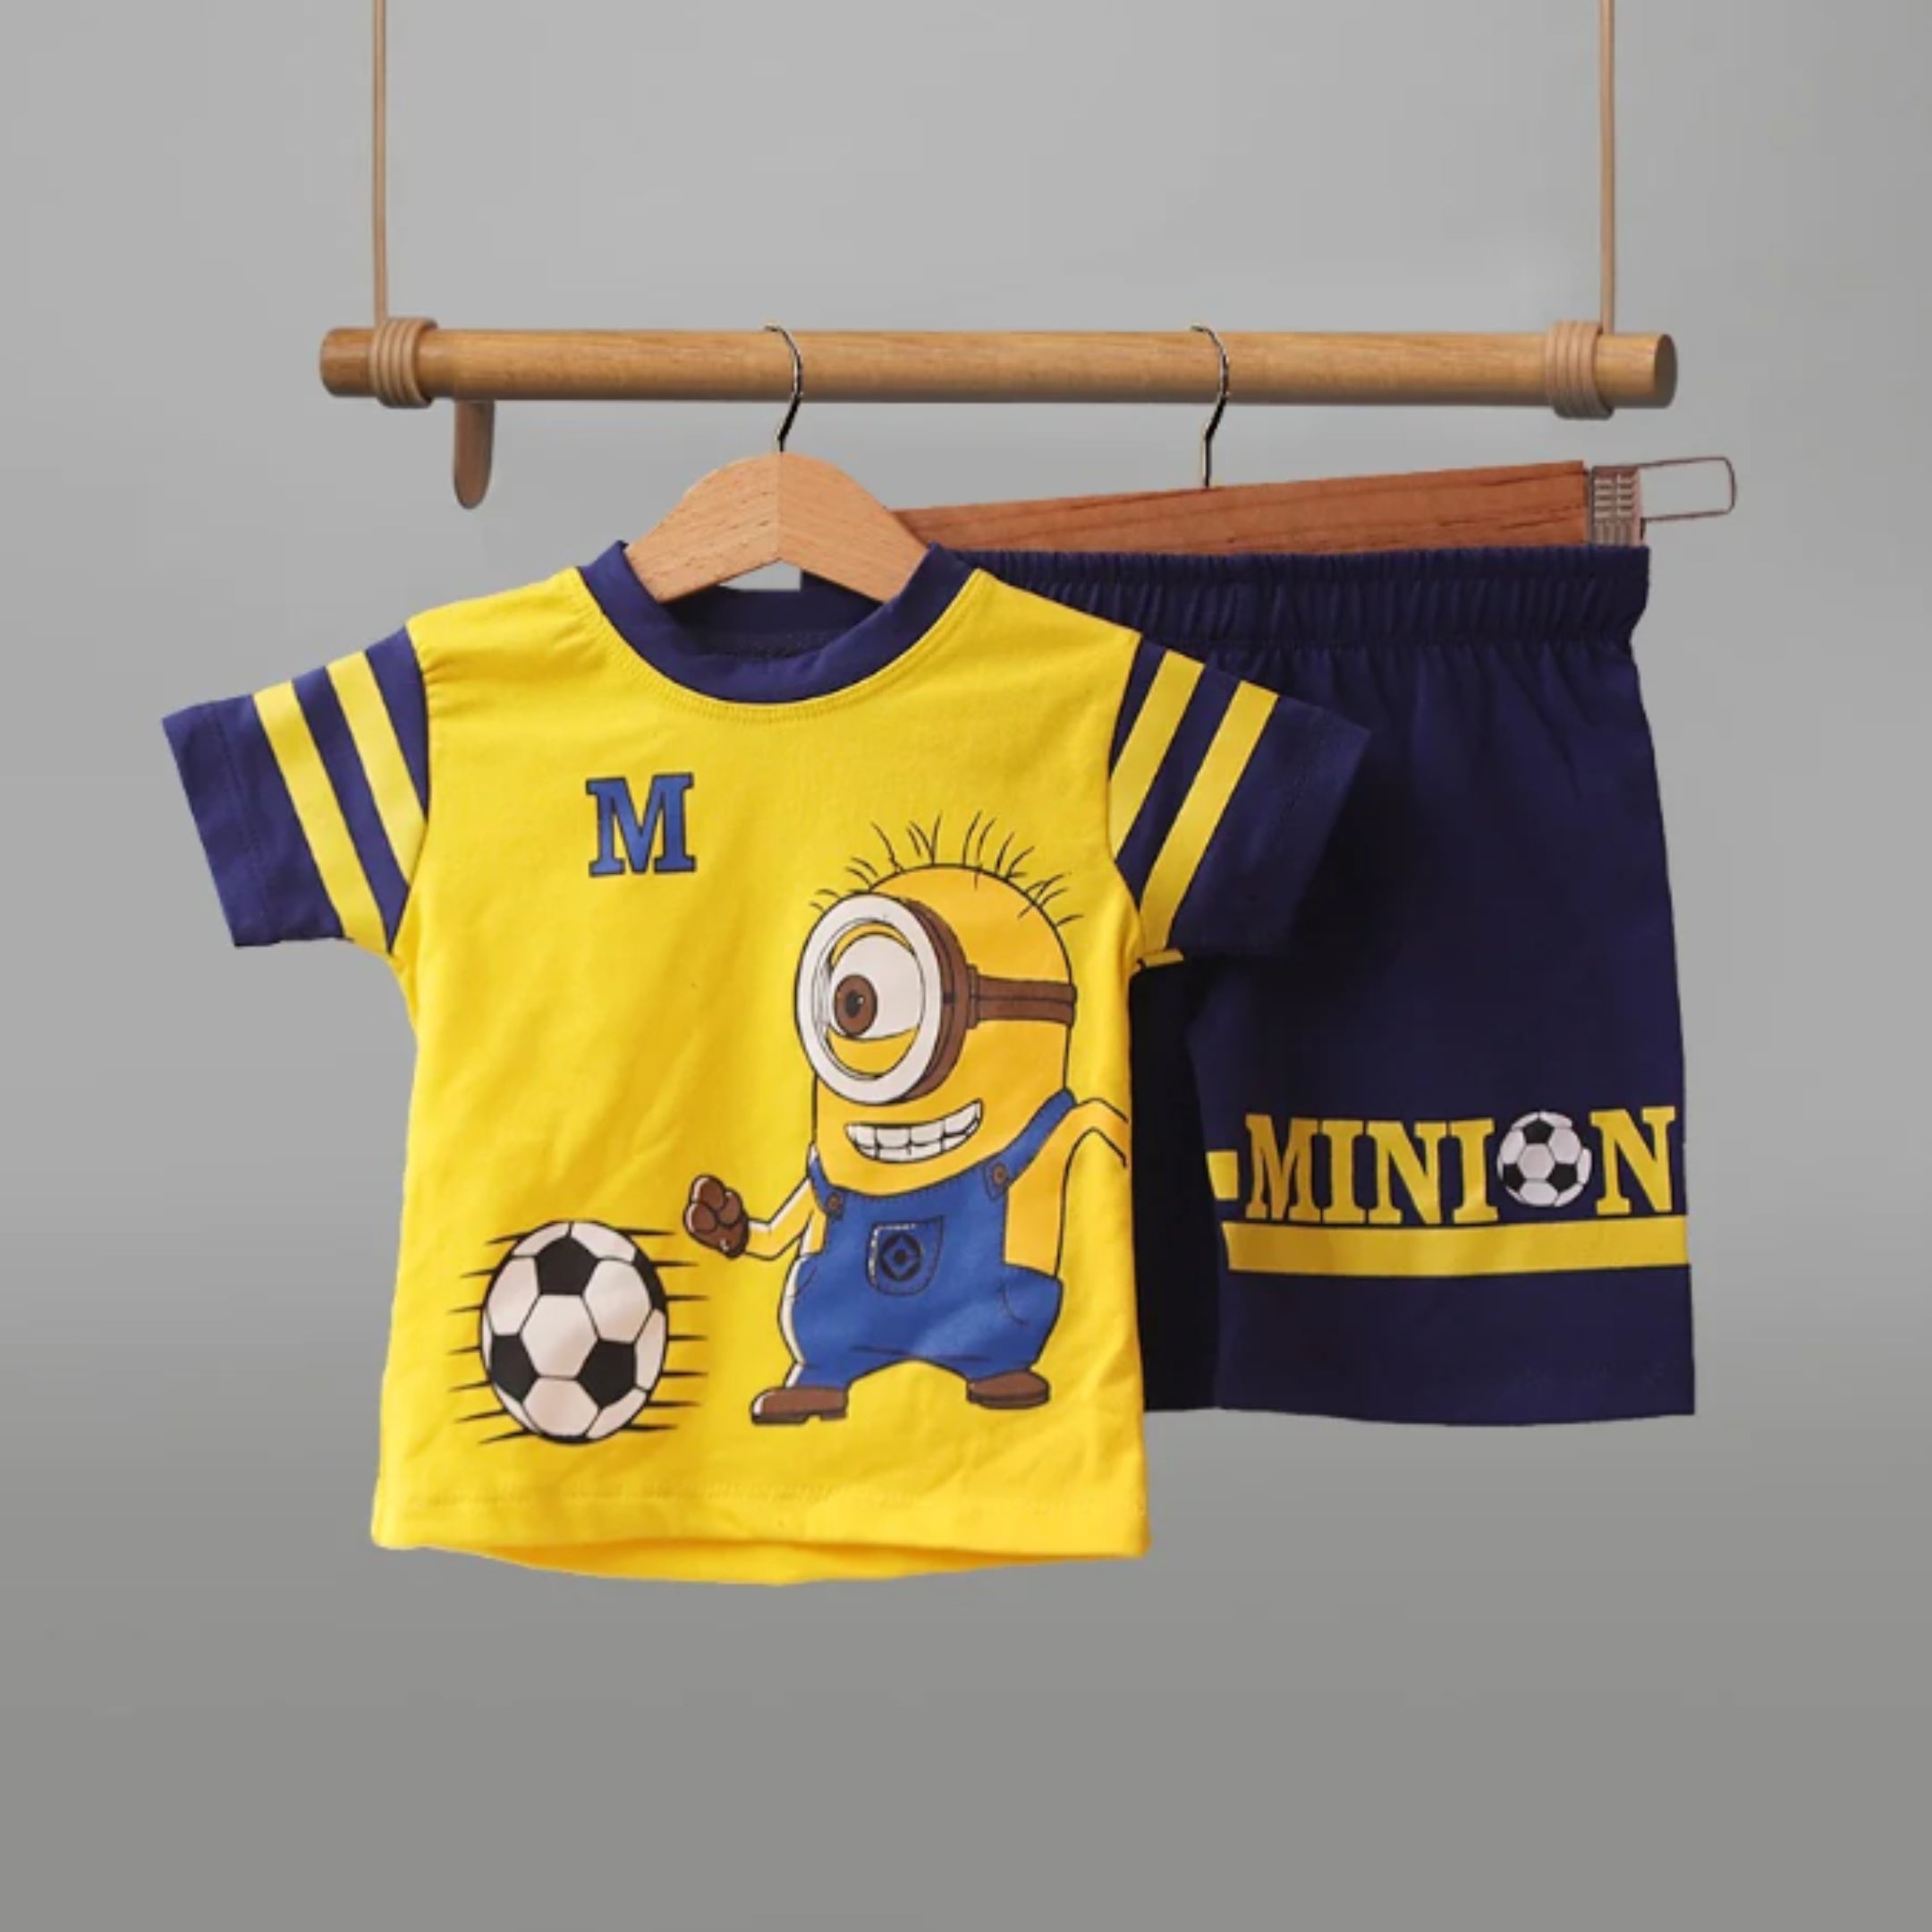 Minion Yellow and Blue T-Shirt And Shorts For Kids